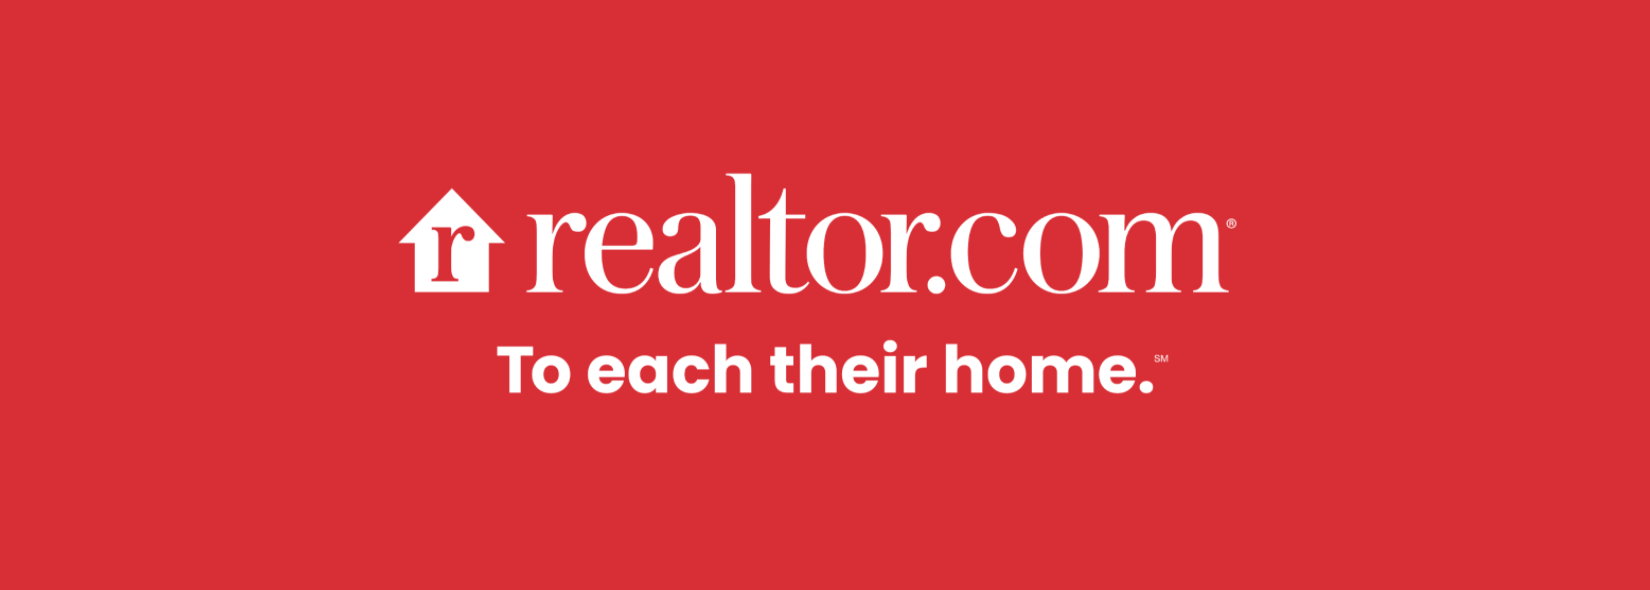 Realtor.com Leads - Reviews and Pricing - 2021 - Hooquest